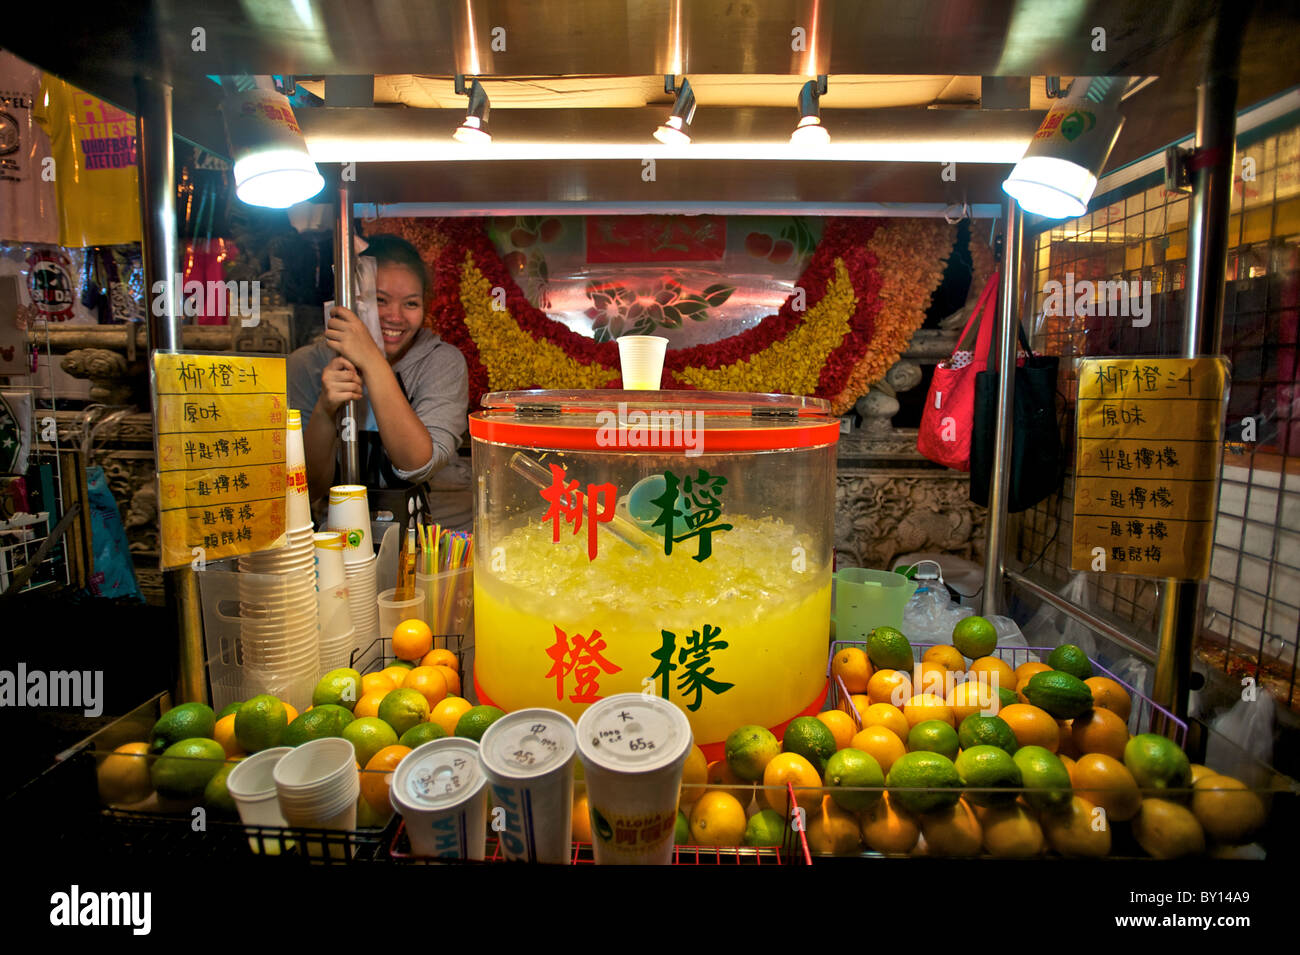 A vendor with her juice stand at a night market in Taipei, Taiwan. Stock Photo